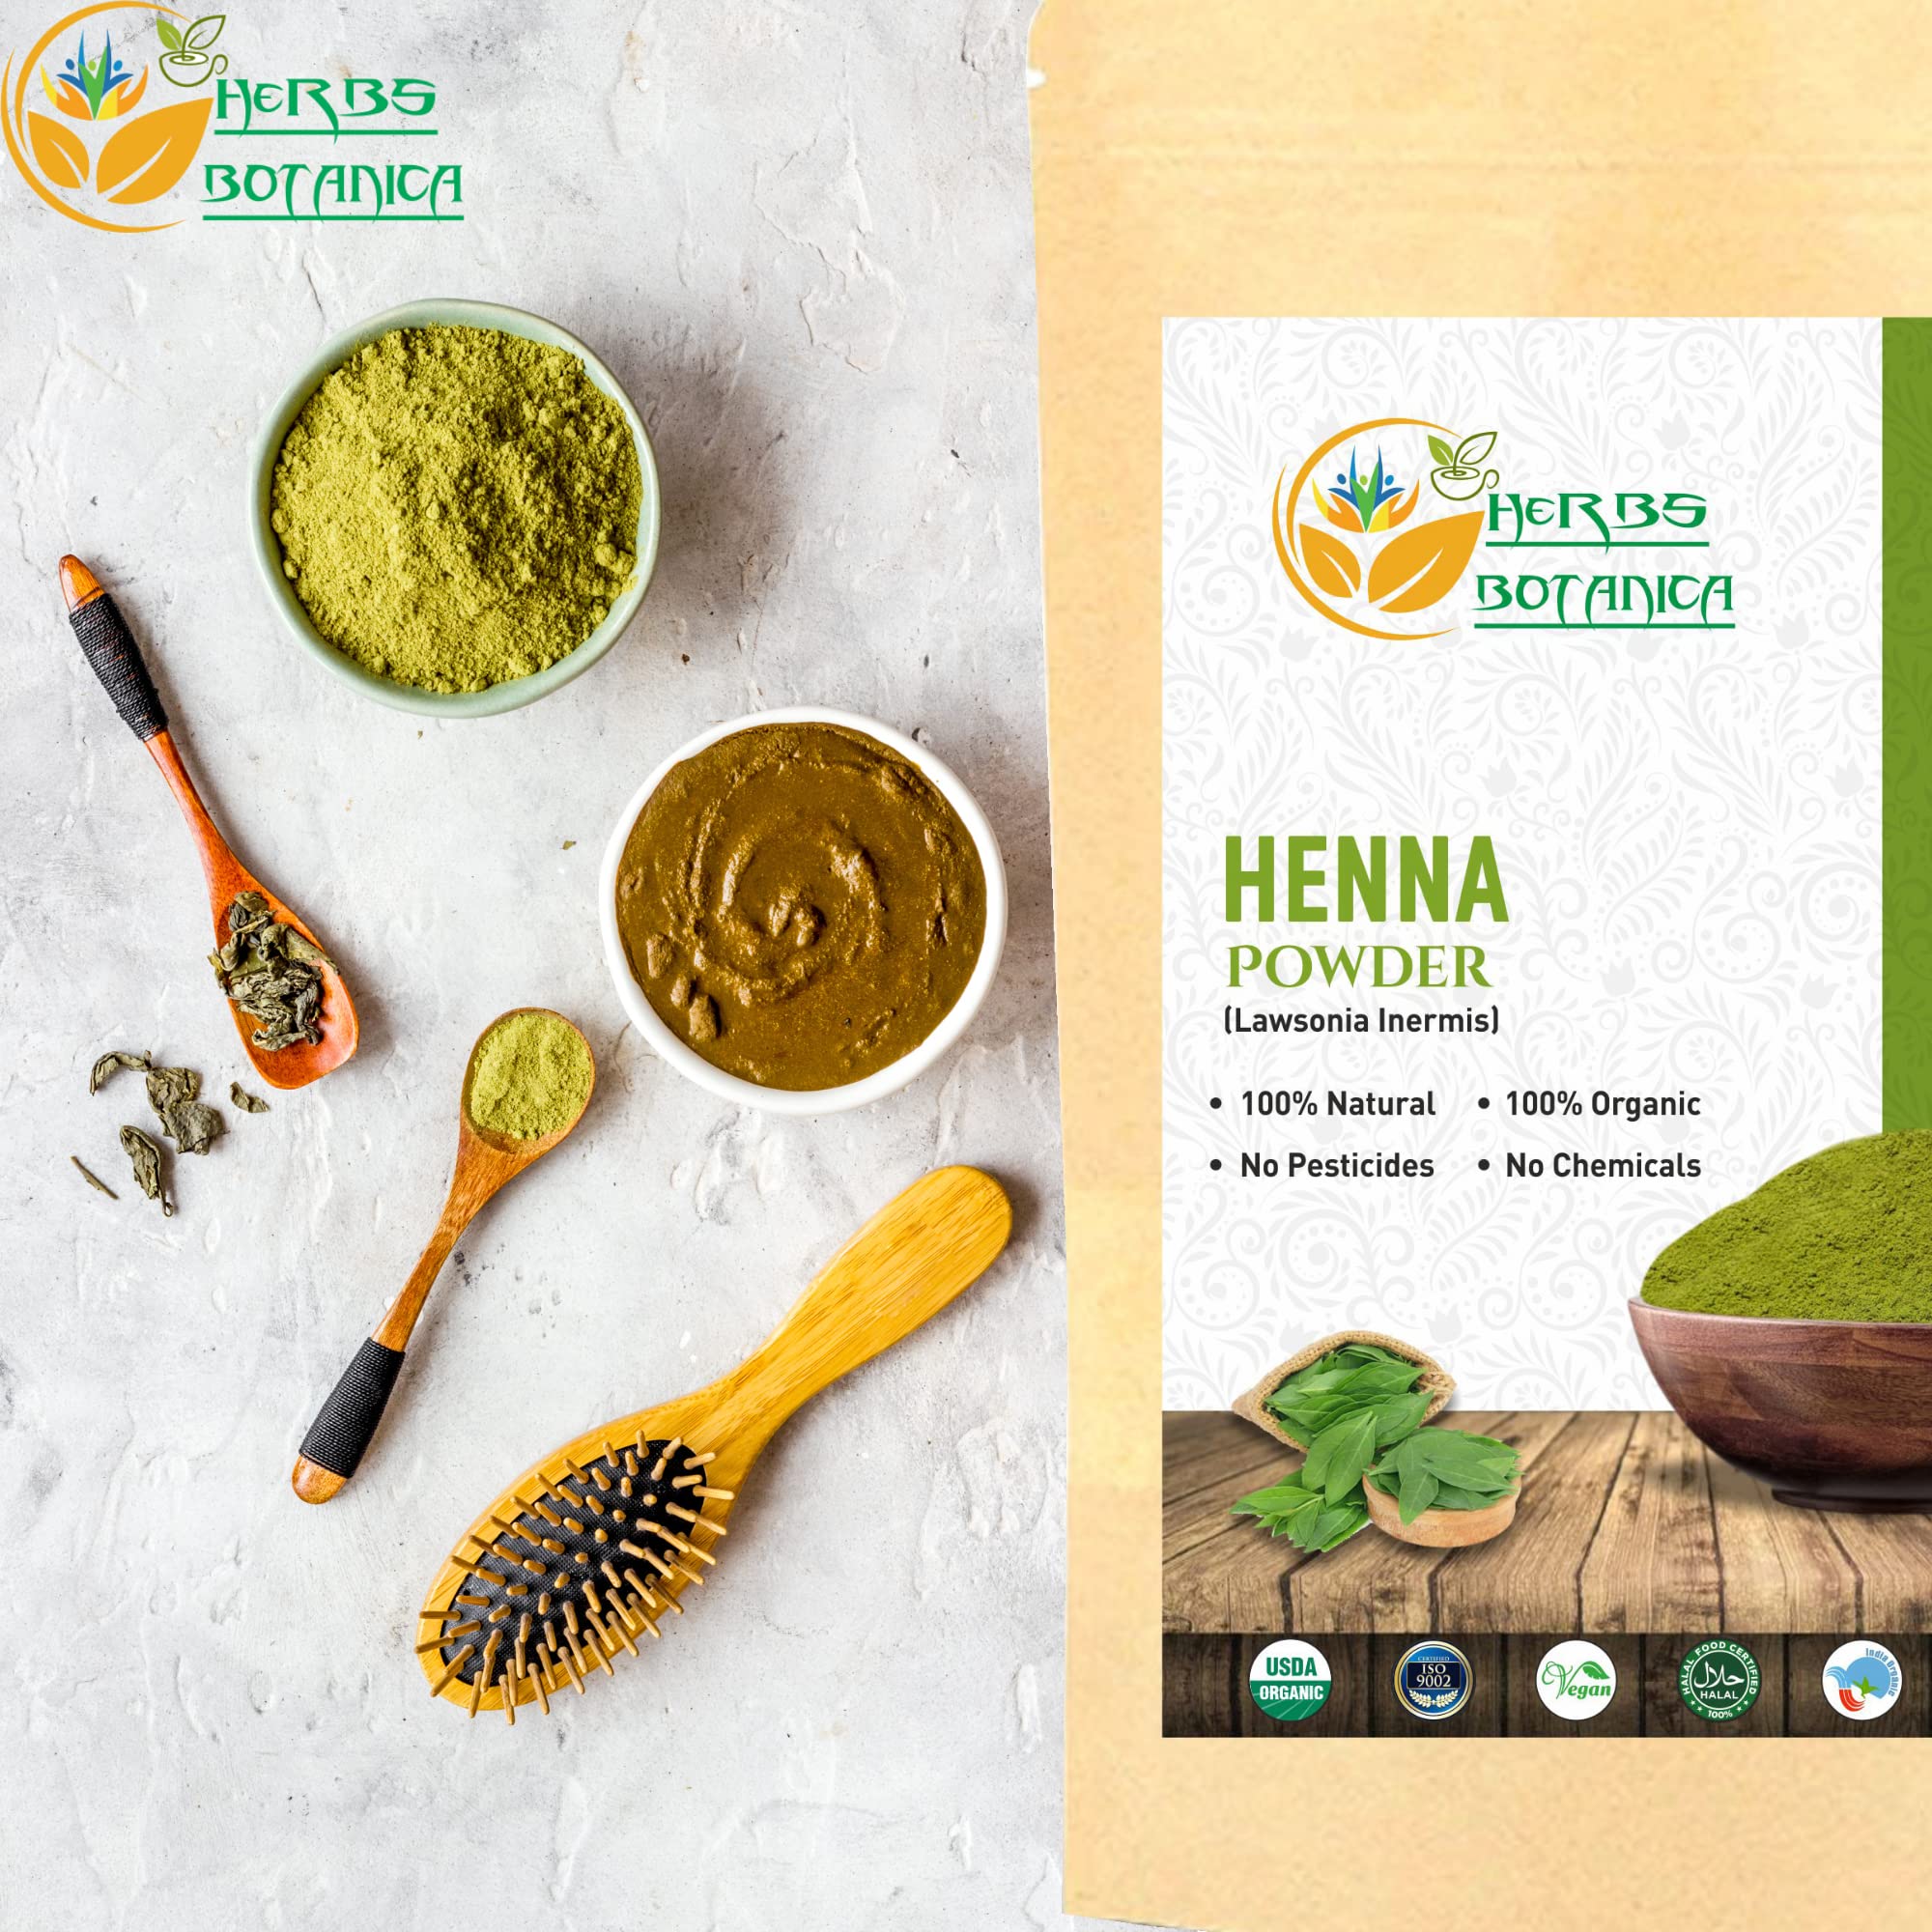 Herbs Botanica Organic Henna Powder For Hair Color 100% Pure Give Natural Color, Shine and Conditioning to Hair Triple Sifted Henna For Hair Dye Grown and Cultivated in Rajasthan 100 % Chemical Free 150 Gms / 5.3 Oz Pack